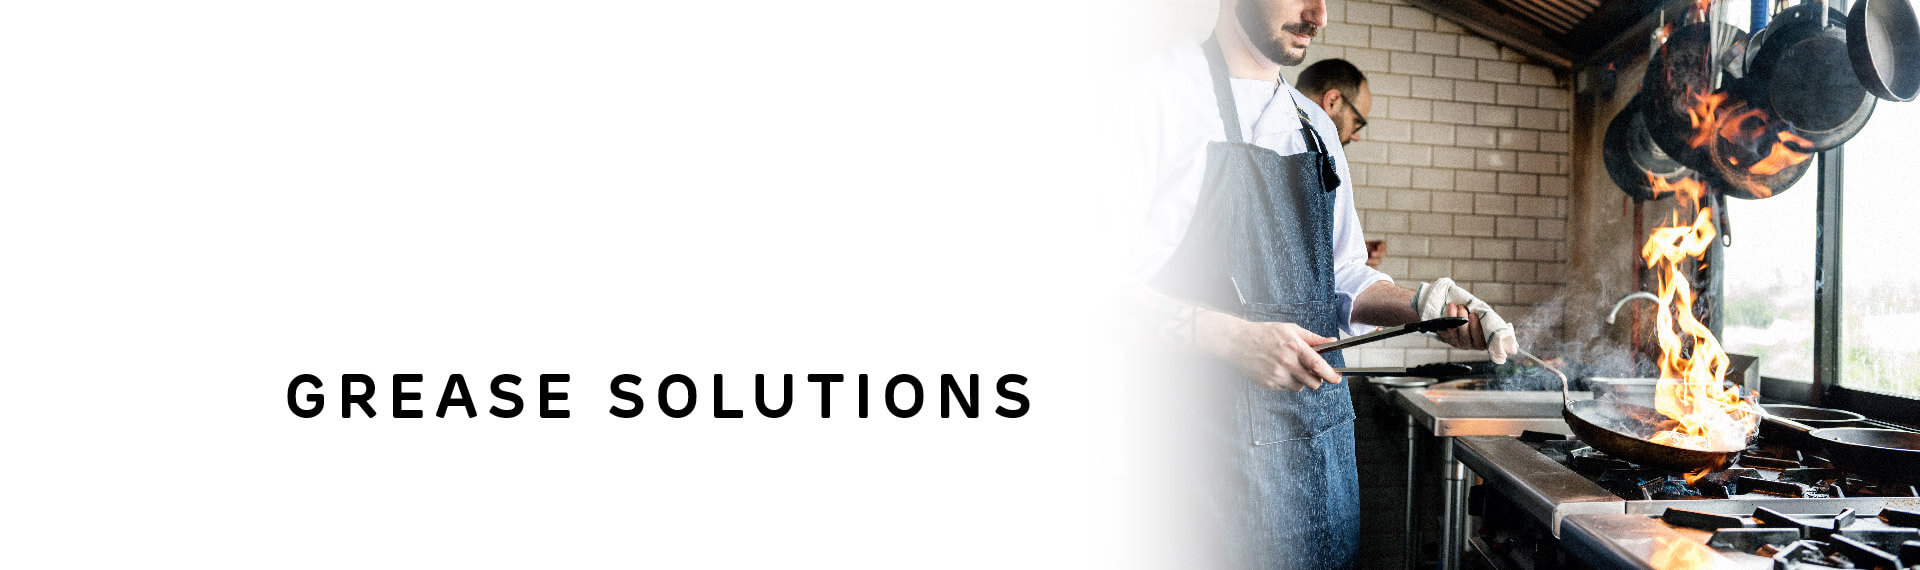 Header image with “Grease Solutions” in capital letters; with a photo of two men working in a commercial kitchen. 